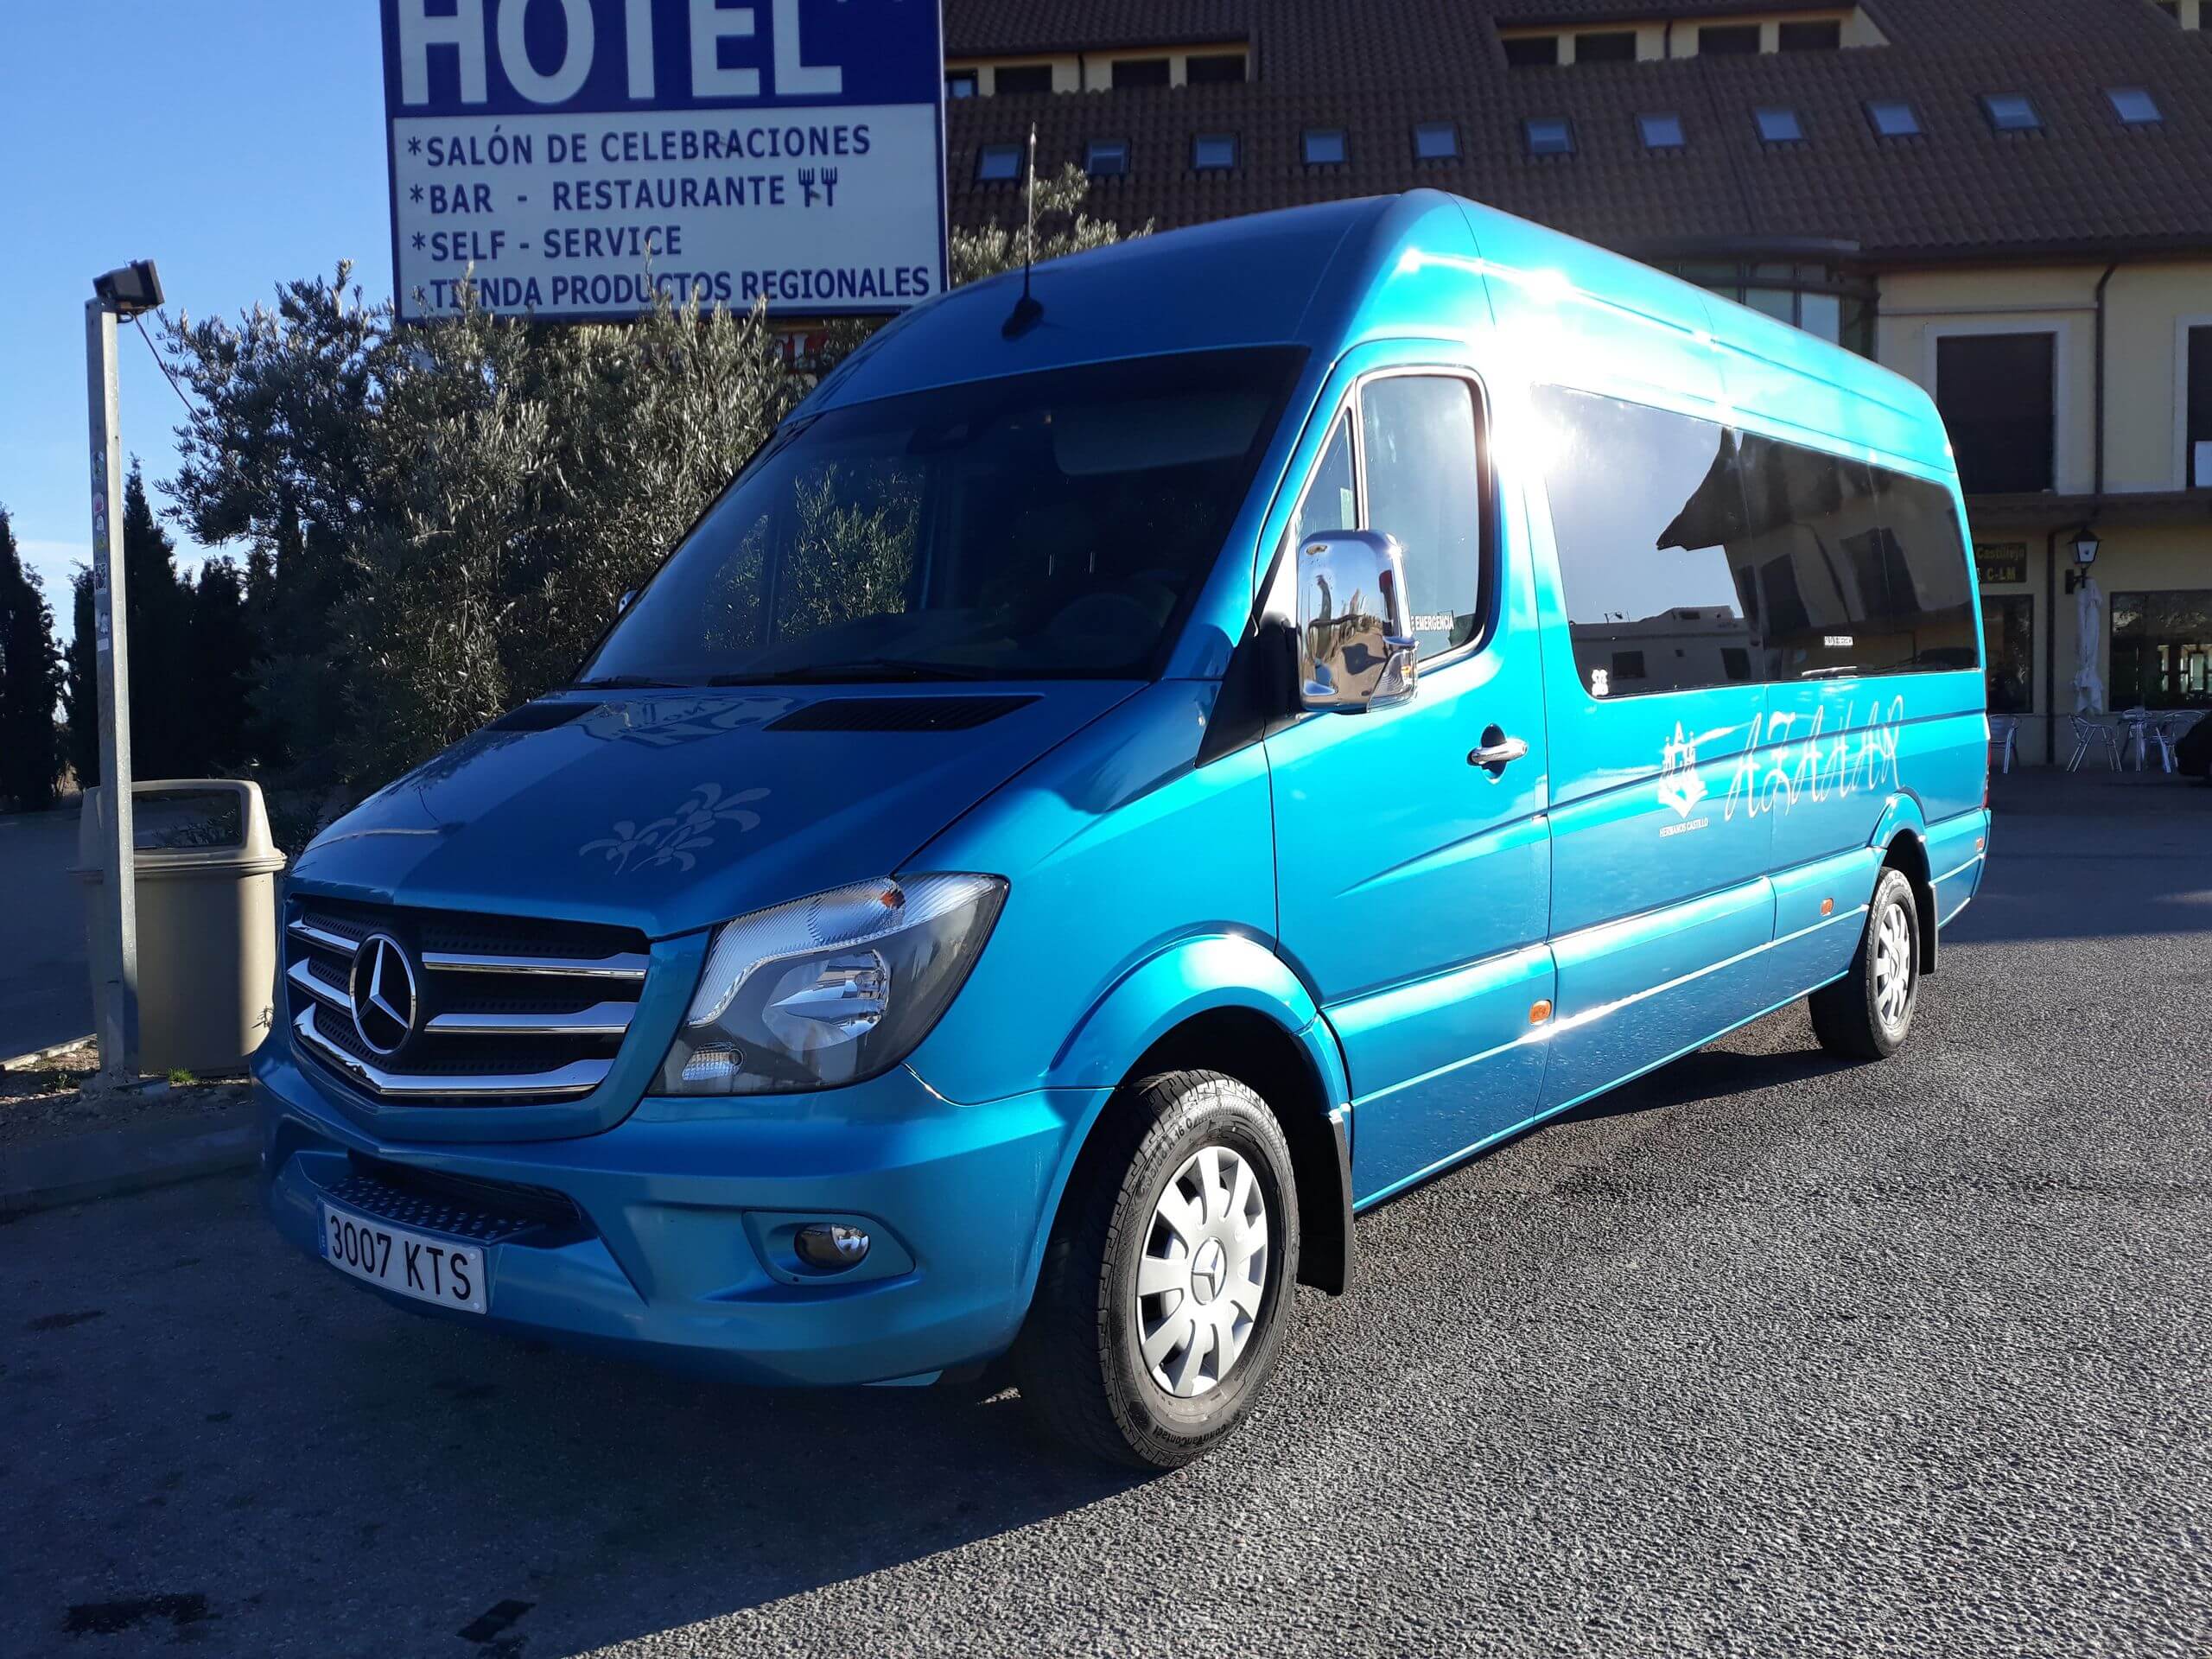 Hire a 16 seater Minibus  (Mercedes Luxus 2019) from AUTOCARES AZAHAR in VILA-REAL 